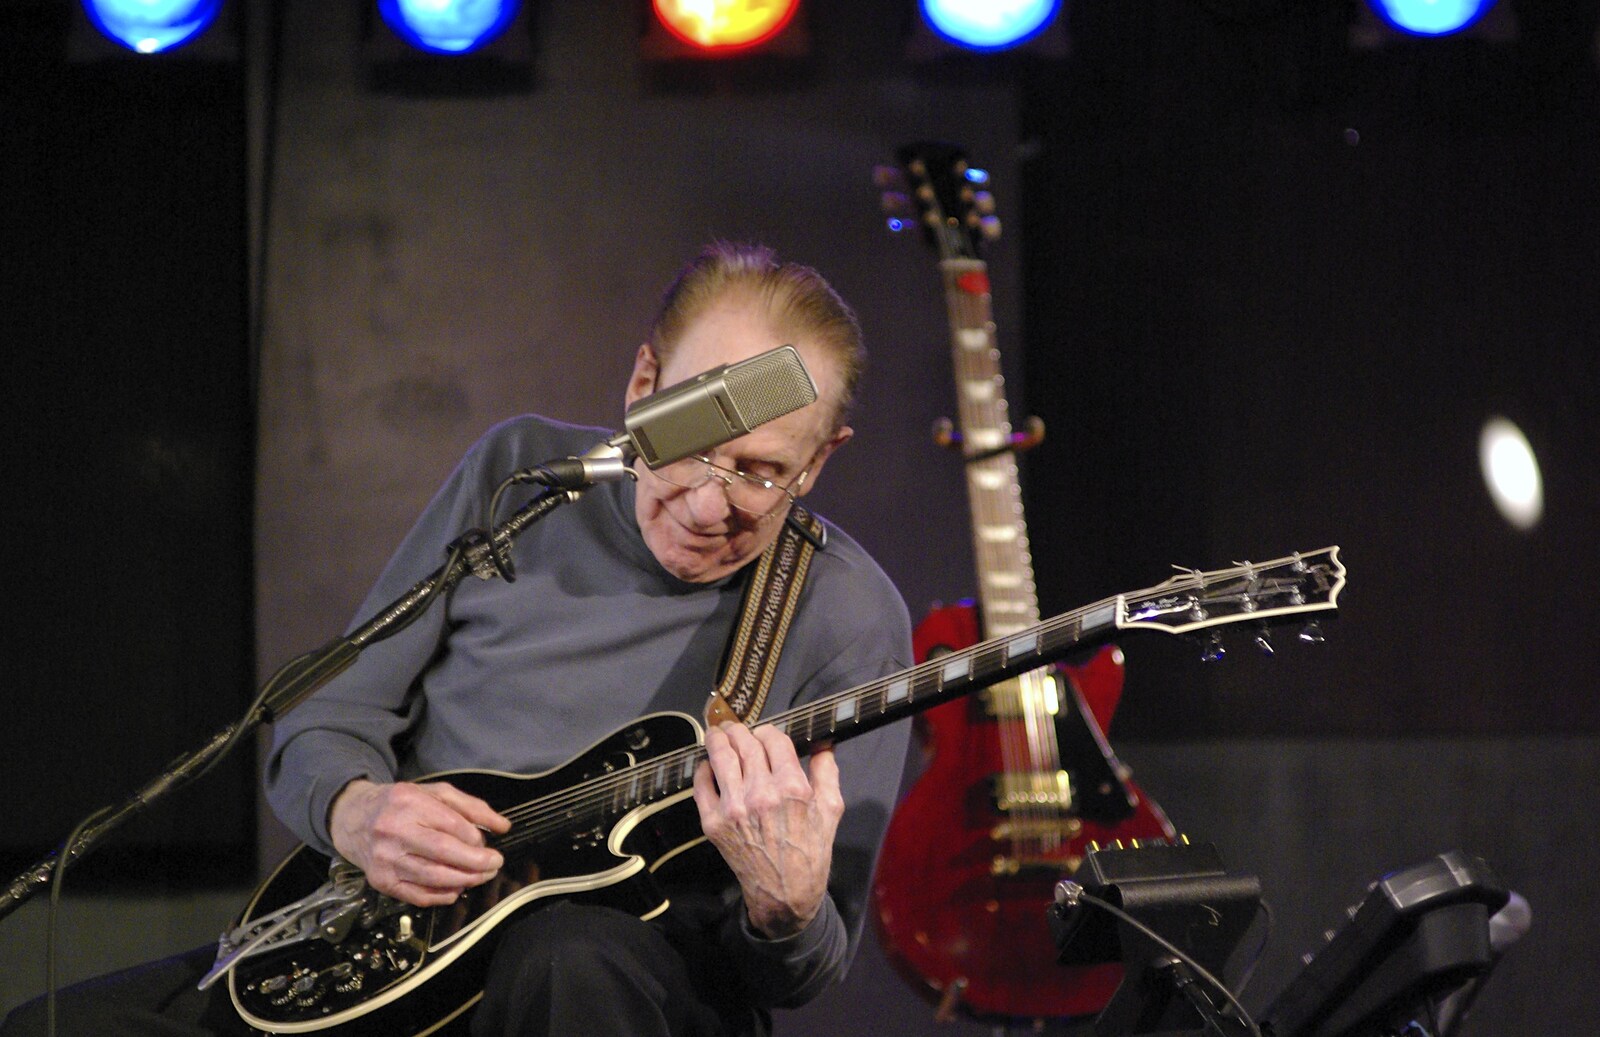 Les Paul plays guitar from A Central Park Marathon, Les Paul at the Iridium Club and an Empire State Sunset, New York, US - 25th March 2007